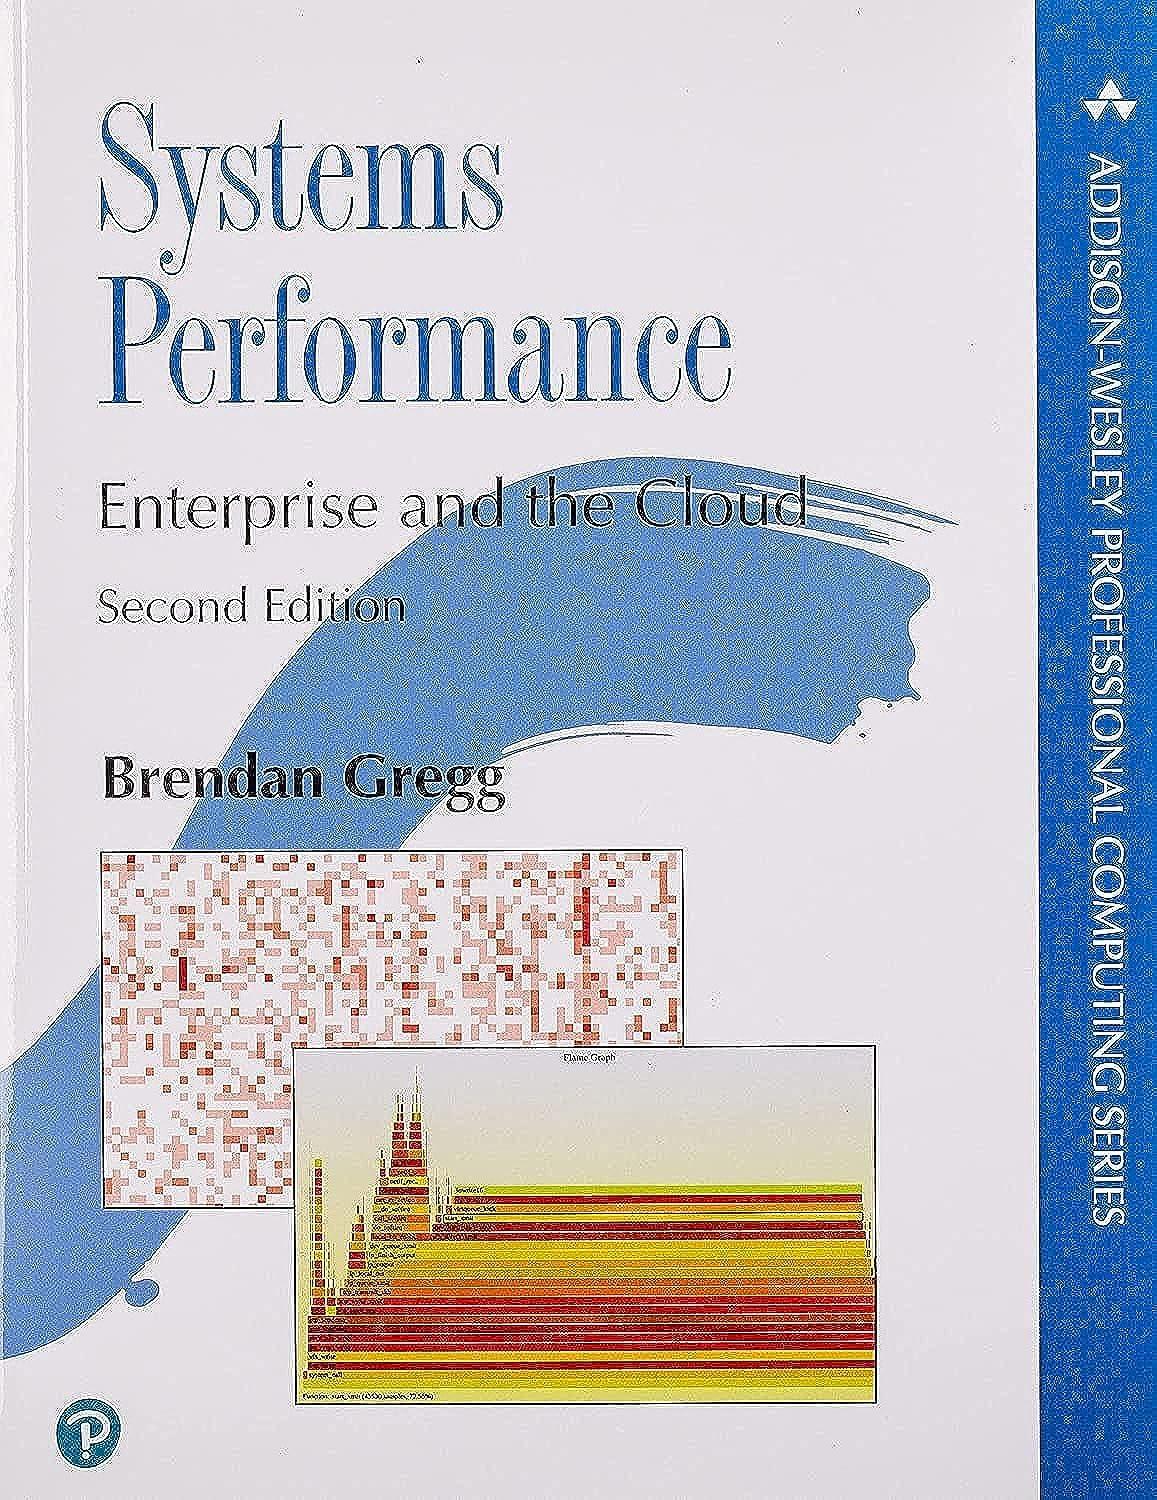 systems performance enterprise and cloud 2nd edition brendan gregg 0136820158, 978-0136820154